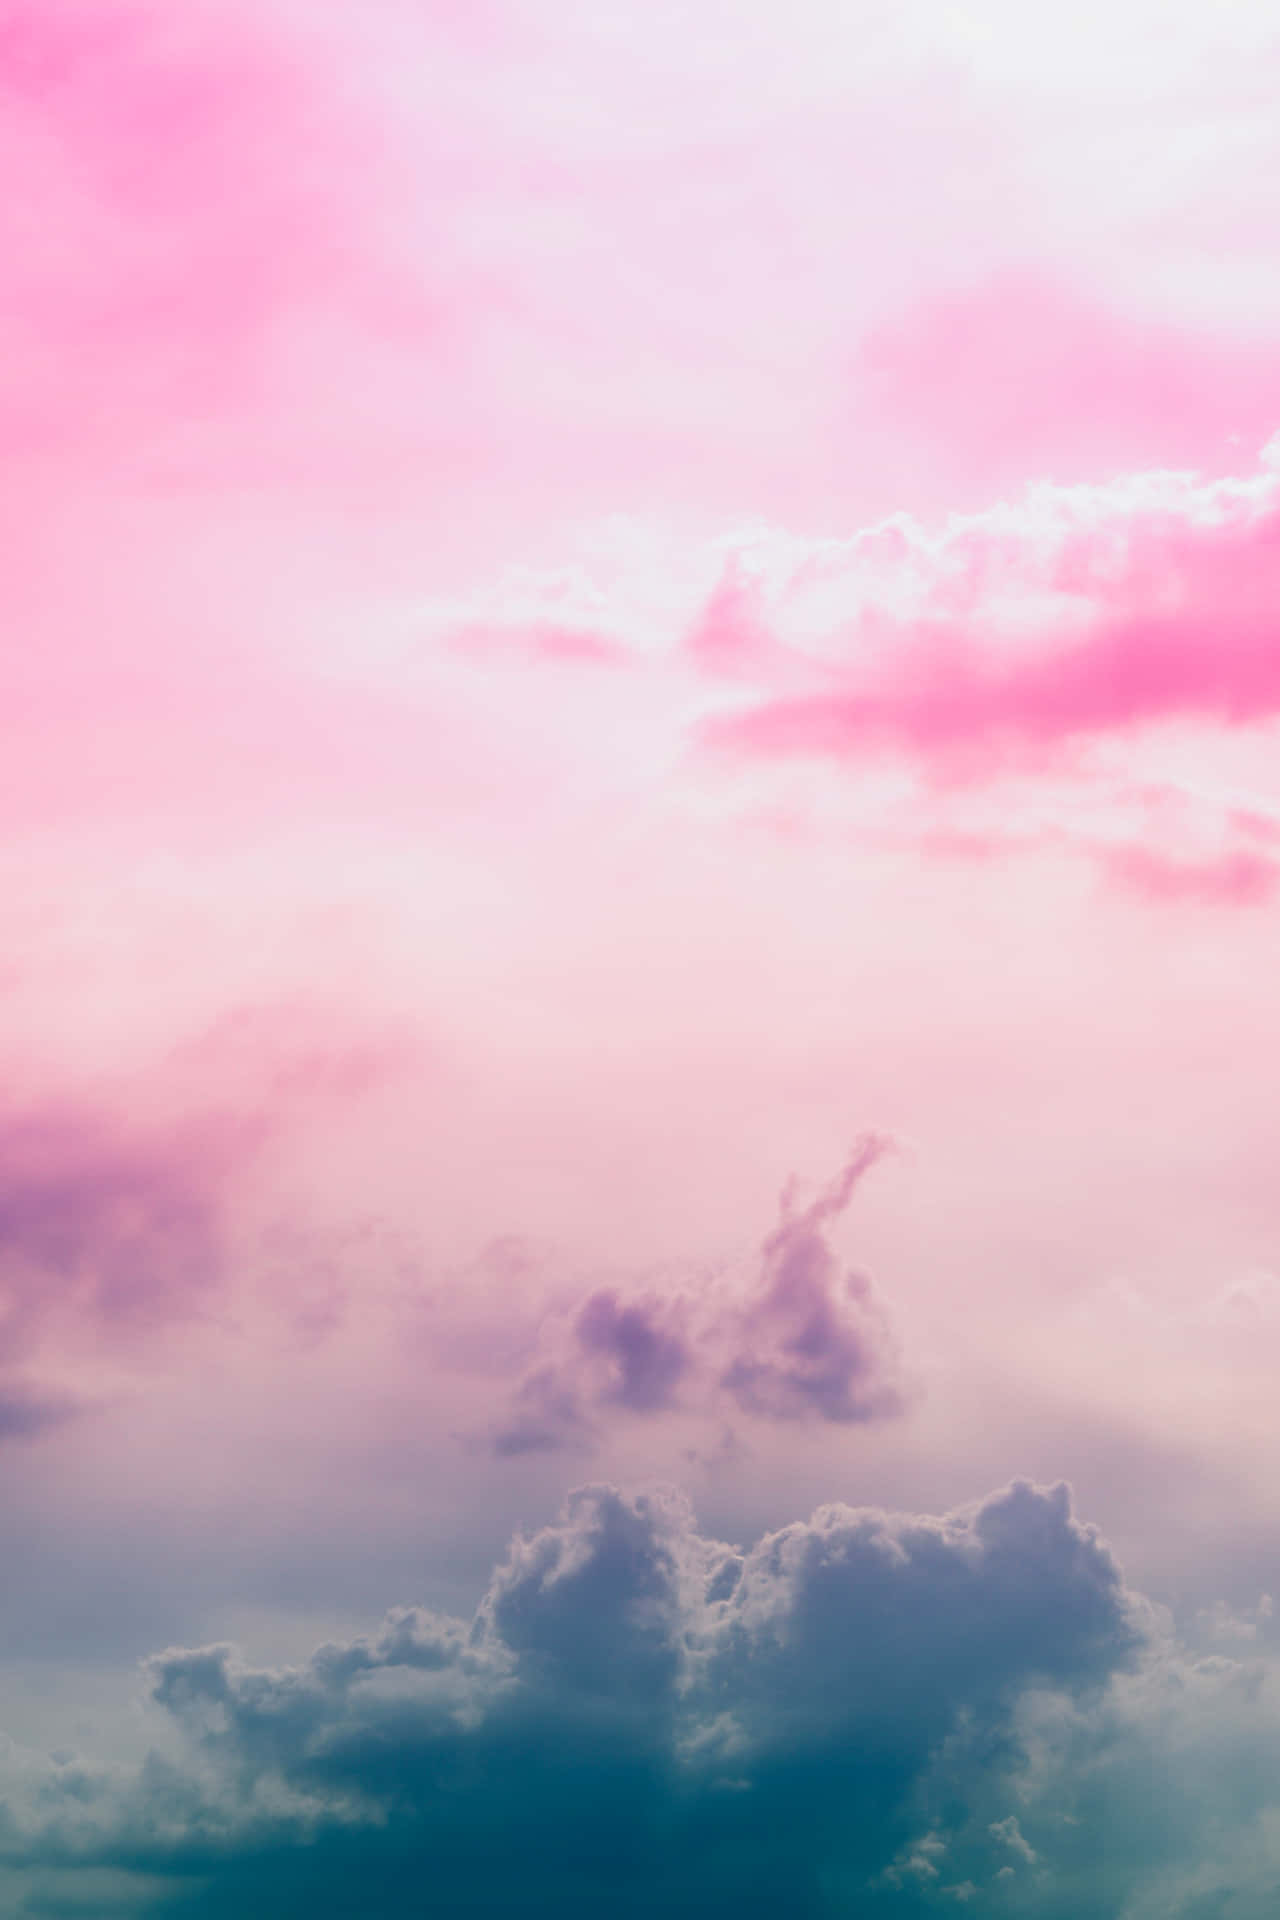 Aesthetic background image of a pink and blue sky with clouds - Blush